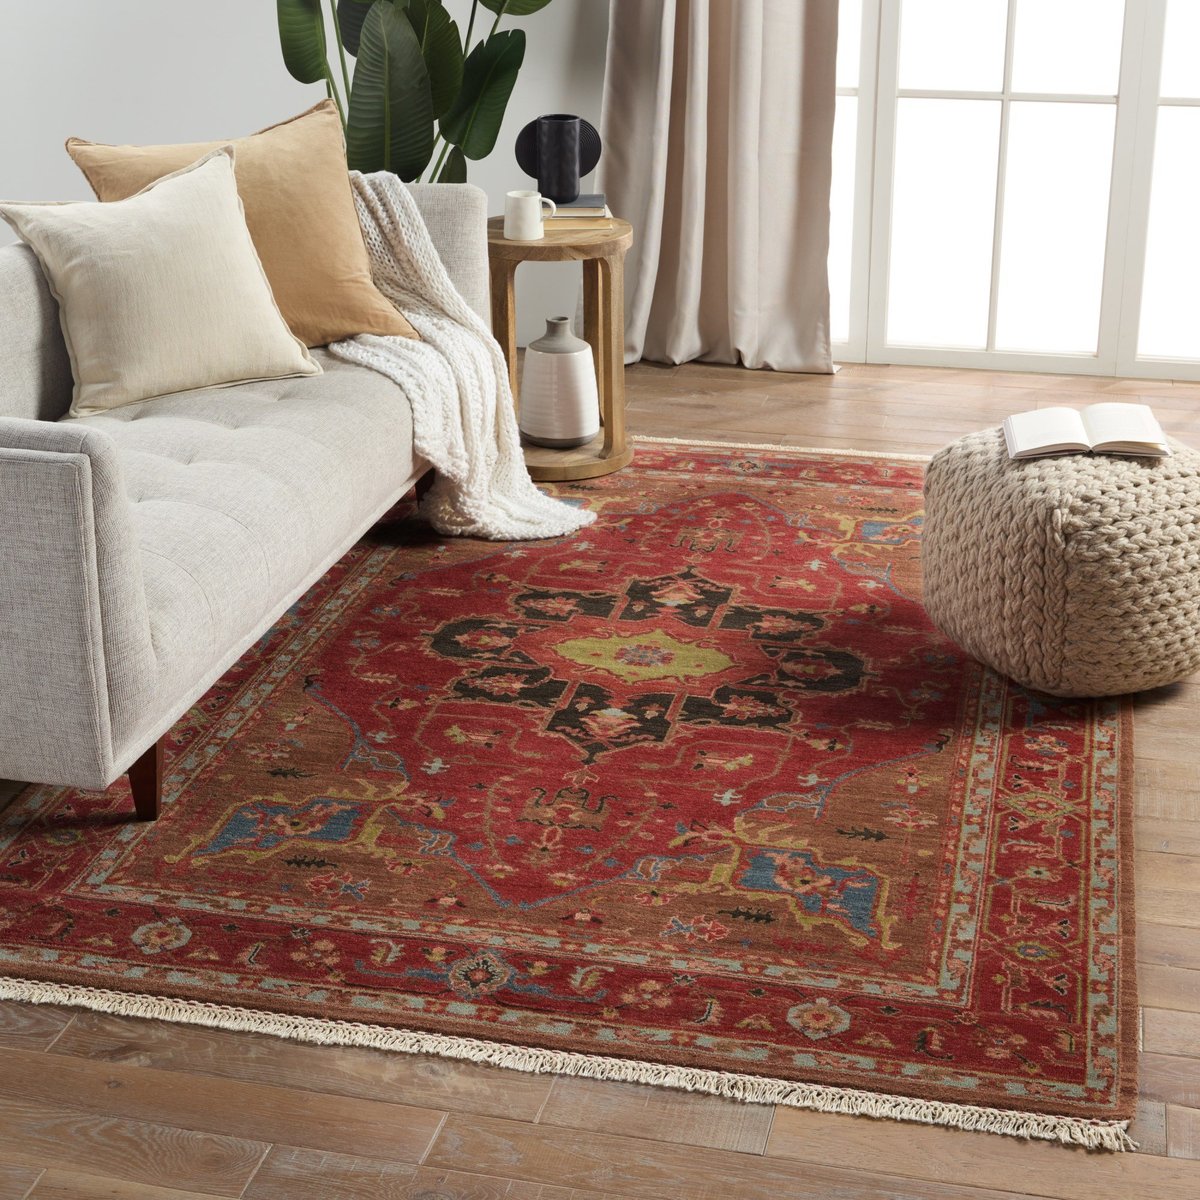 Rubber Backed Rugs In Area Rugs for sale